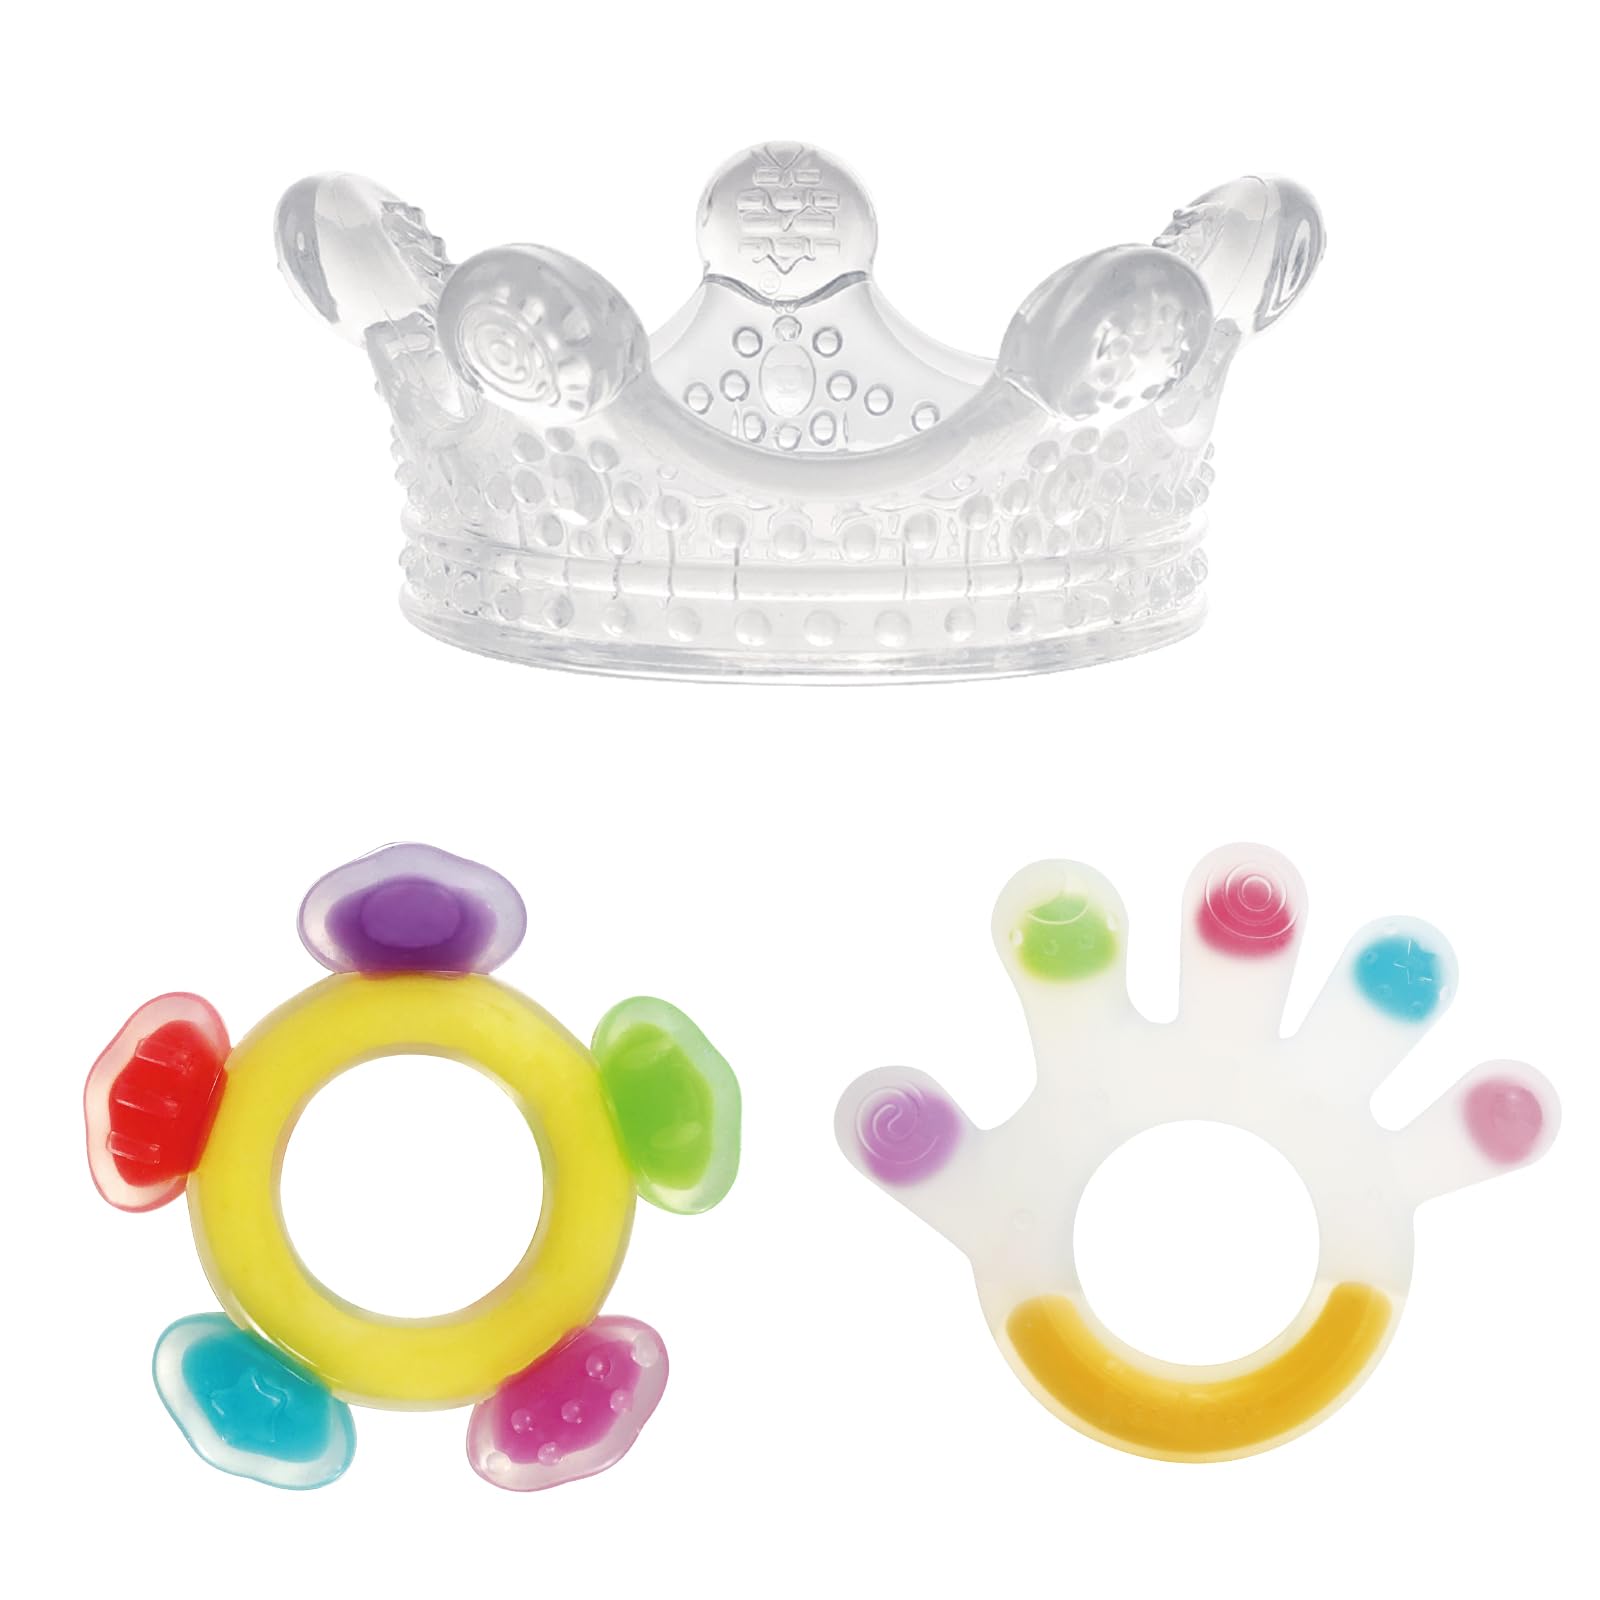 haakaa Silicone Teether Combo&Crown Teether Set-Baby Freezer Teething Toy|Super Soft Silicone Teething Toys